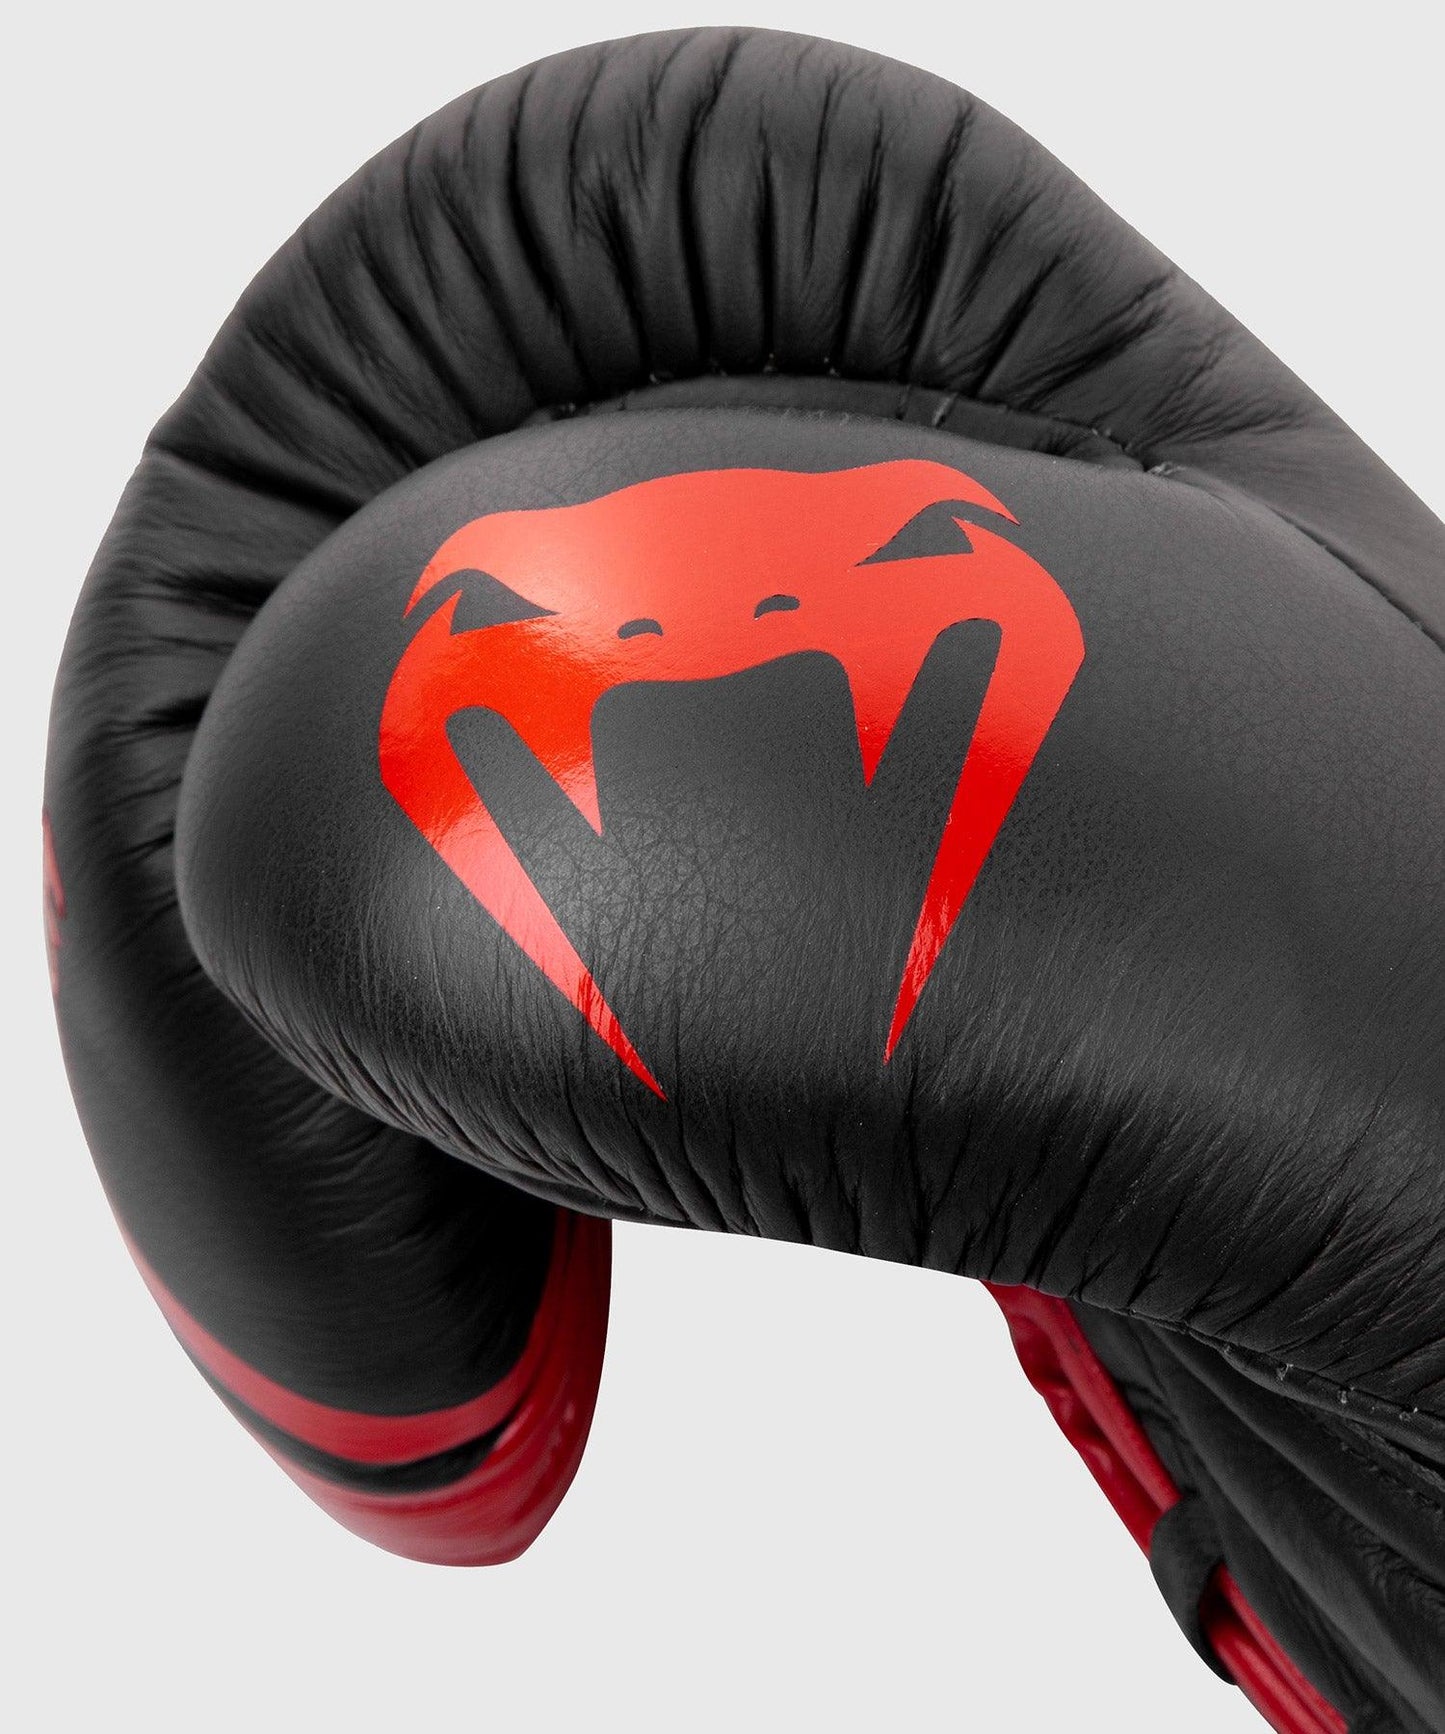 Venum Shield Pro Boxing Gloves - With Laces - Black/Red Picture 4